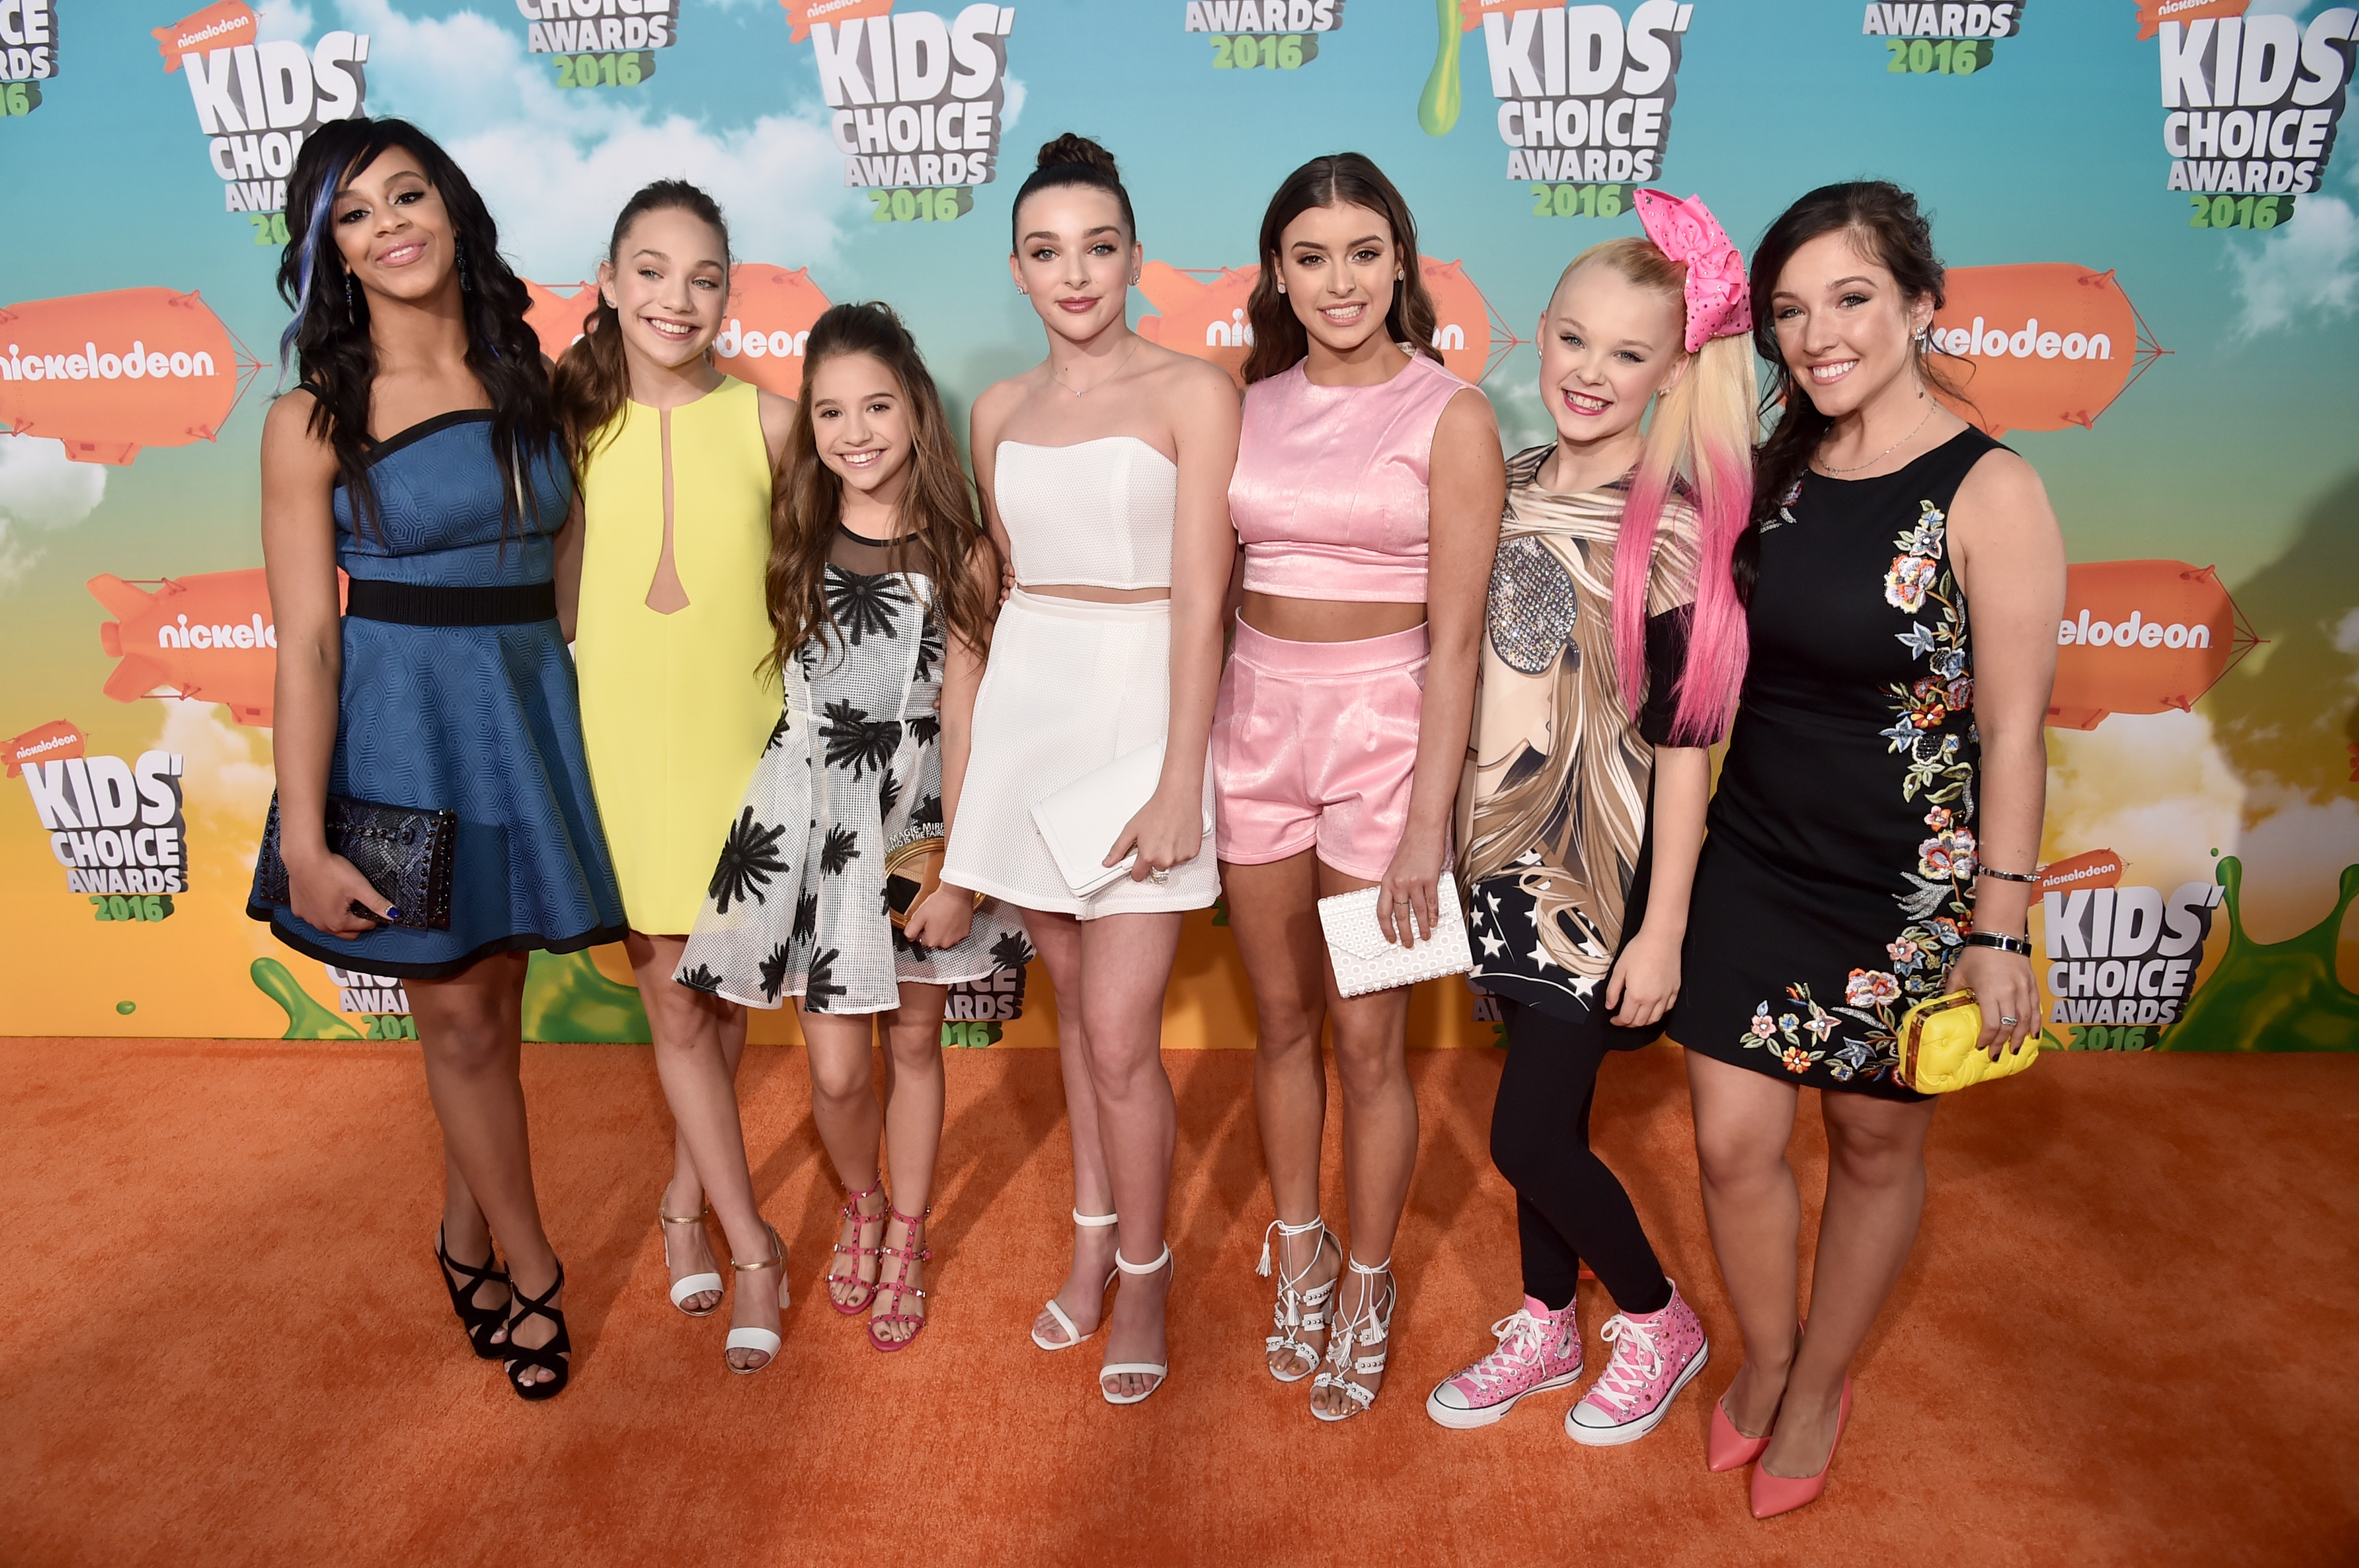 Dance Moms Porn - Is Dance Moms Scripted? According to Maddie Ziegler, Pretty Much...